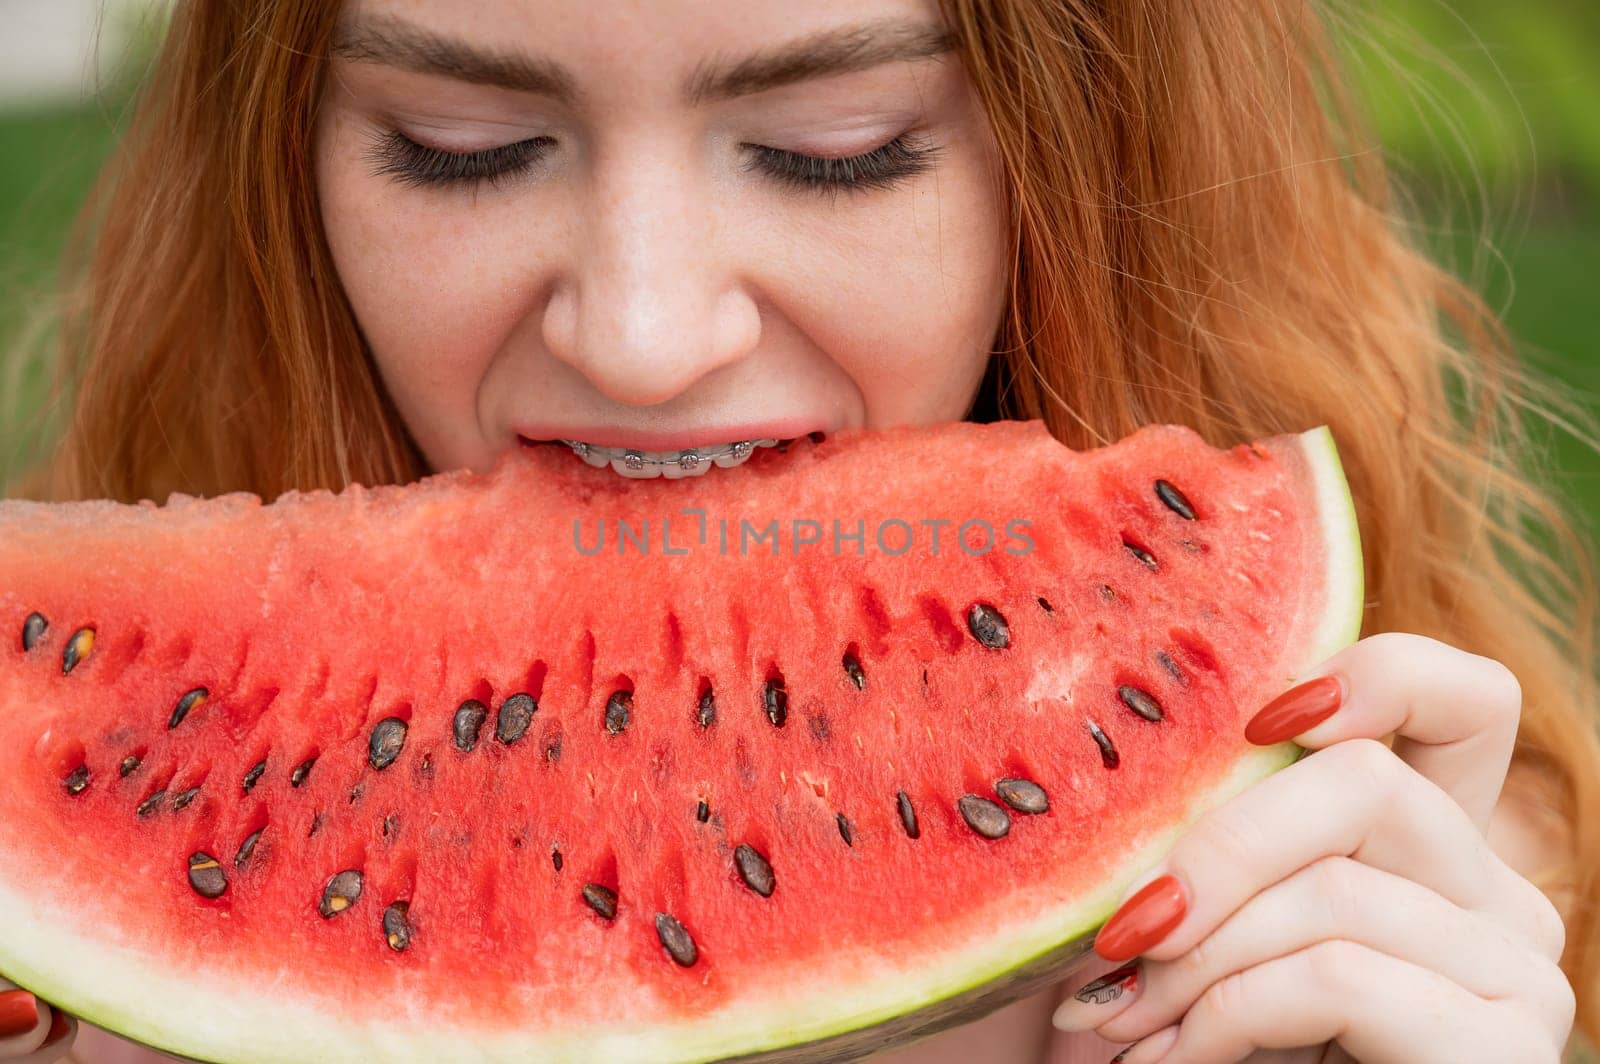 Close-up portrait of red-haired young woman with braces eating watermelon outdoors.